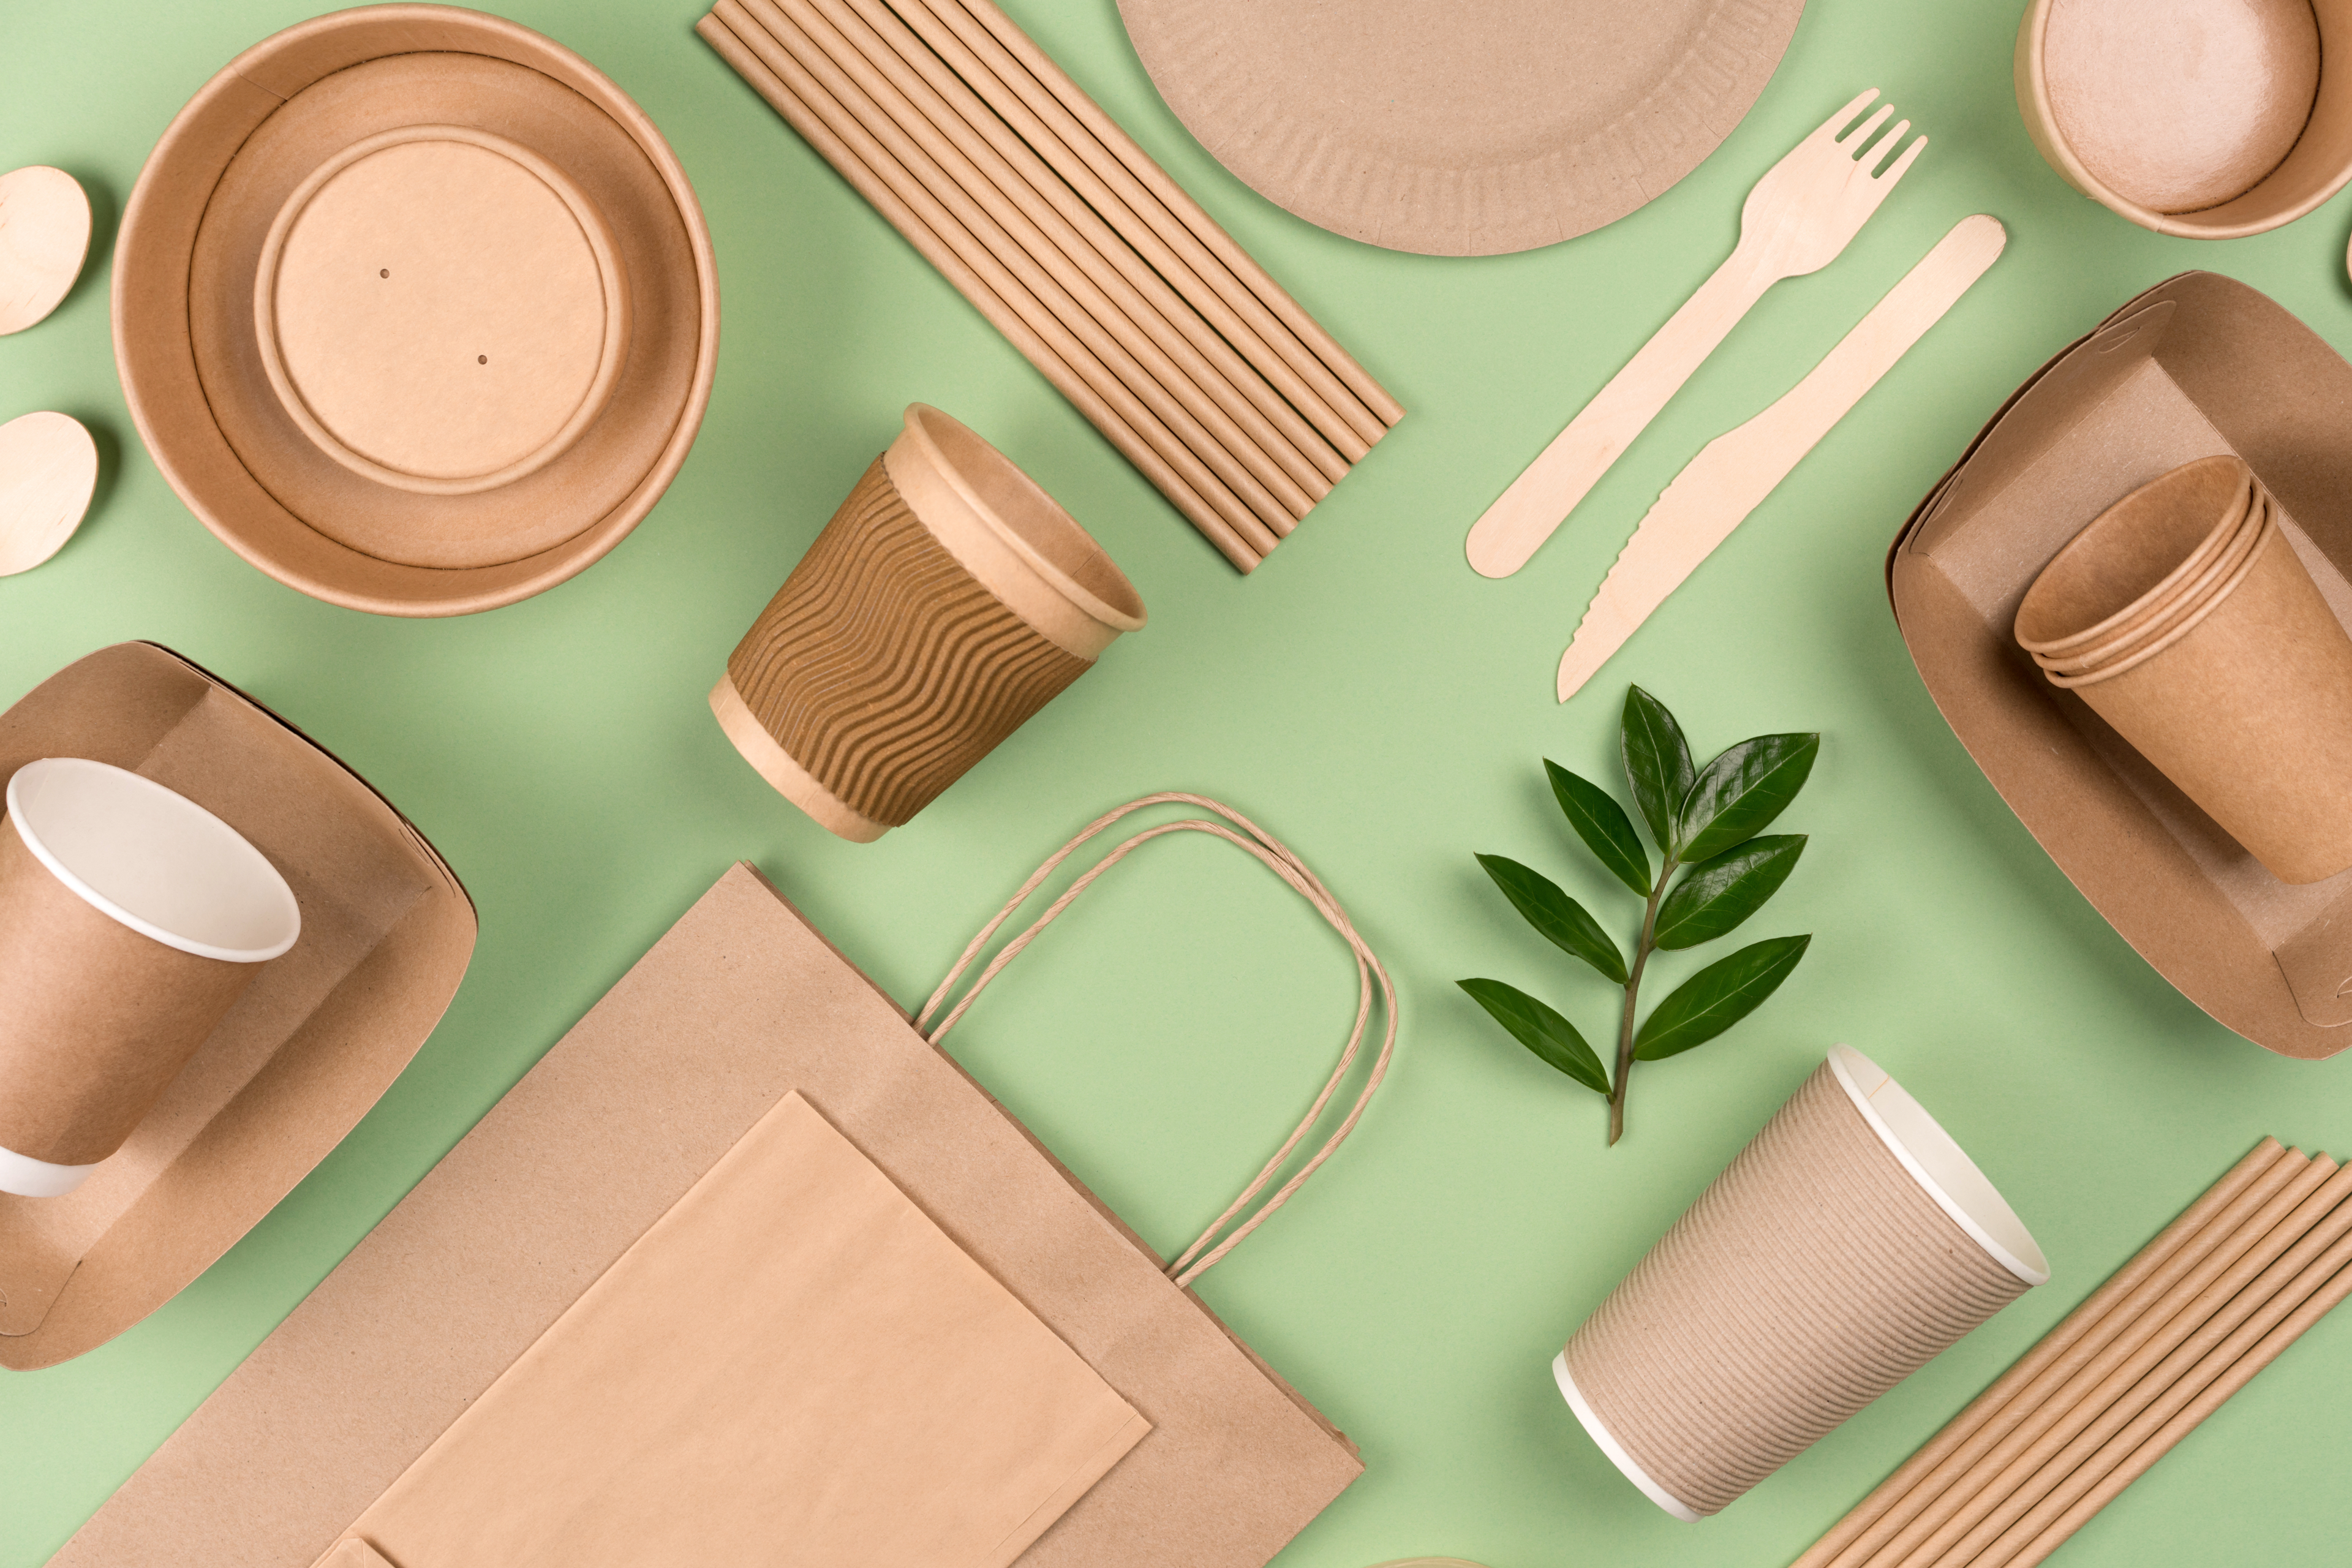 A pastel green background hosts a variety of kraft paper bags, food trays, food containers, straws and wooden cutlery